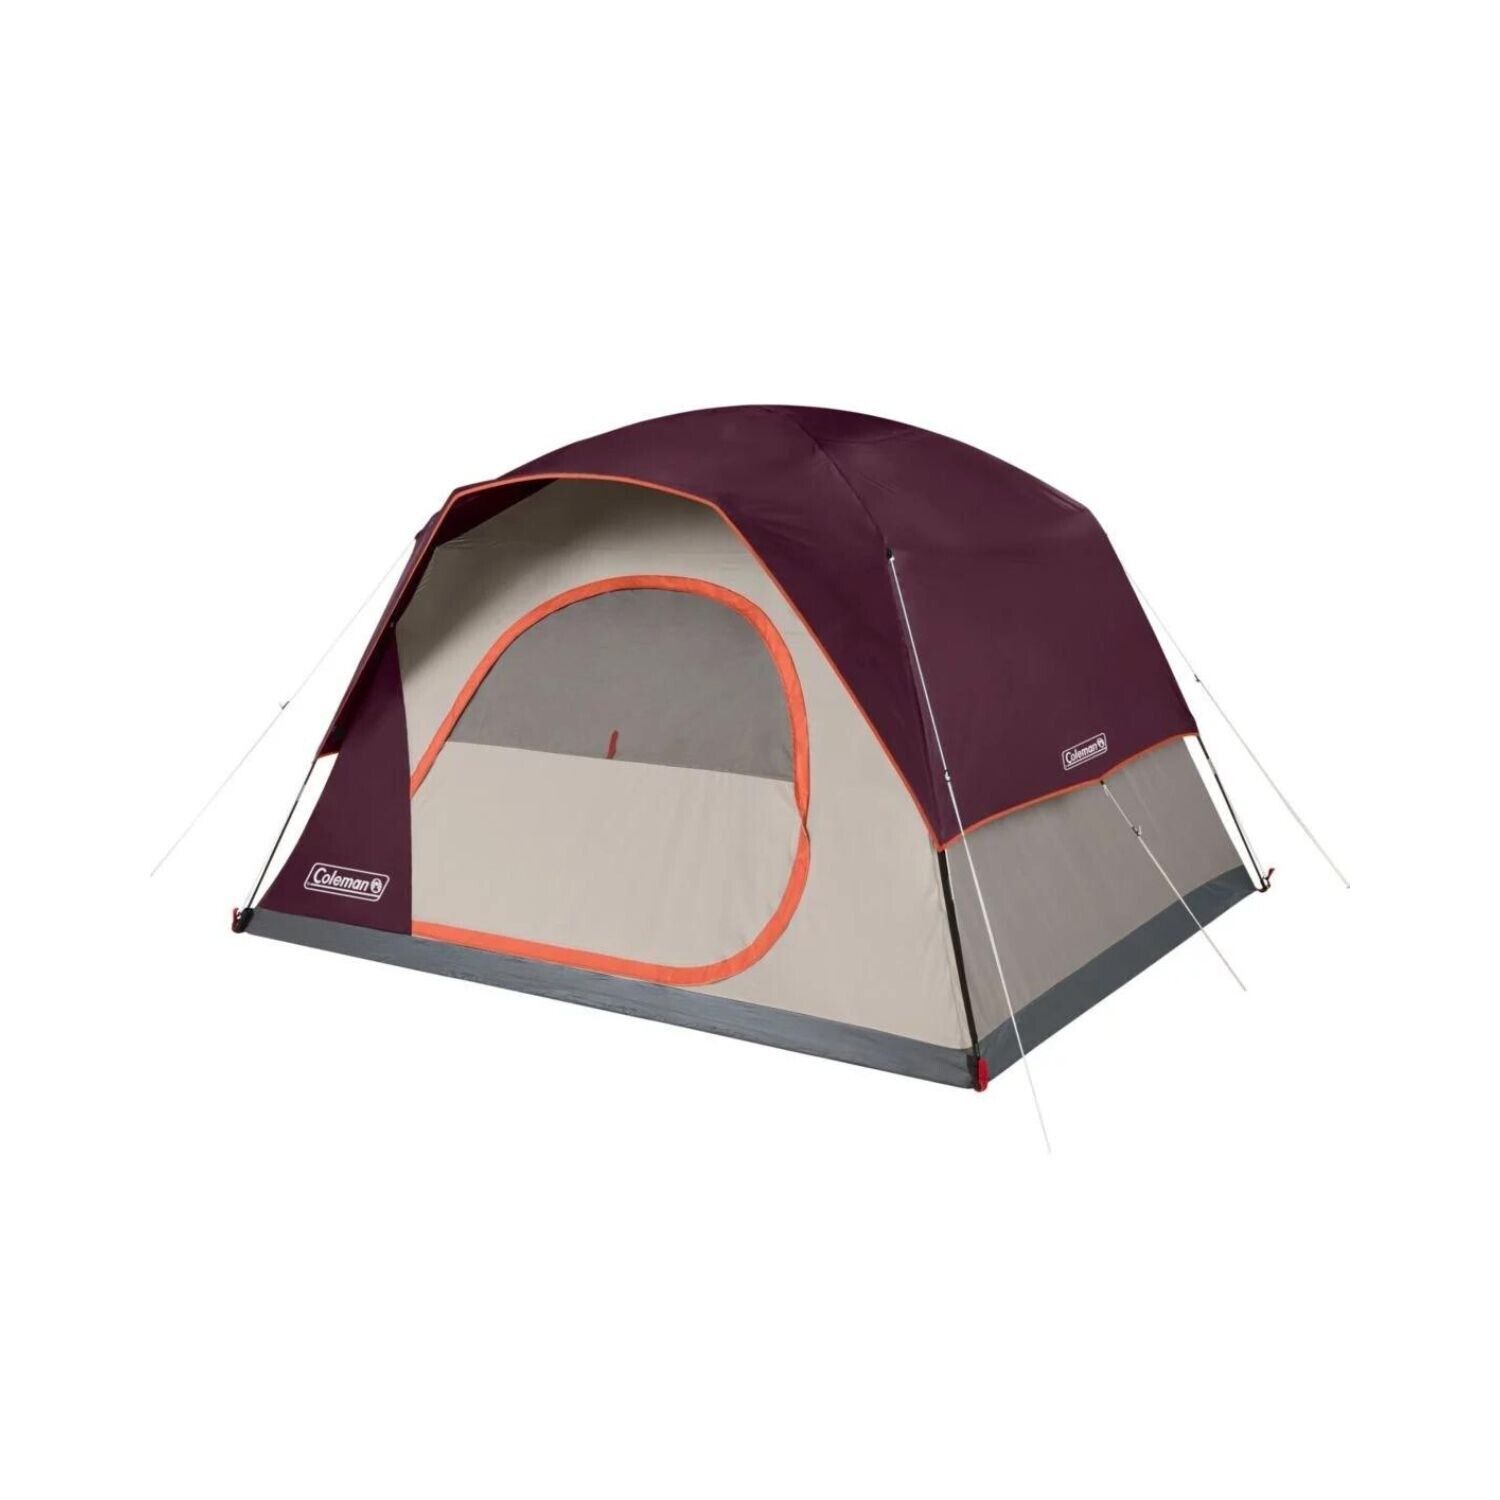 Coleman Camping Tent Skydome 6 - Person Blackberry C002 WeatherTec System Purple